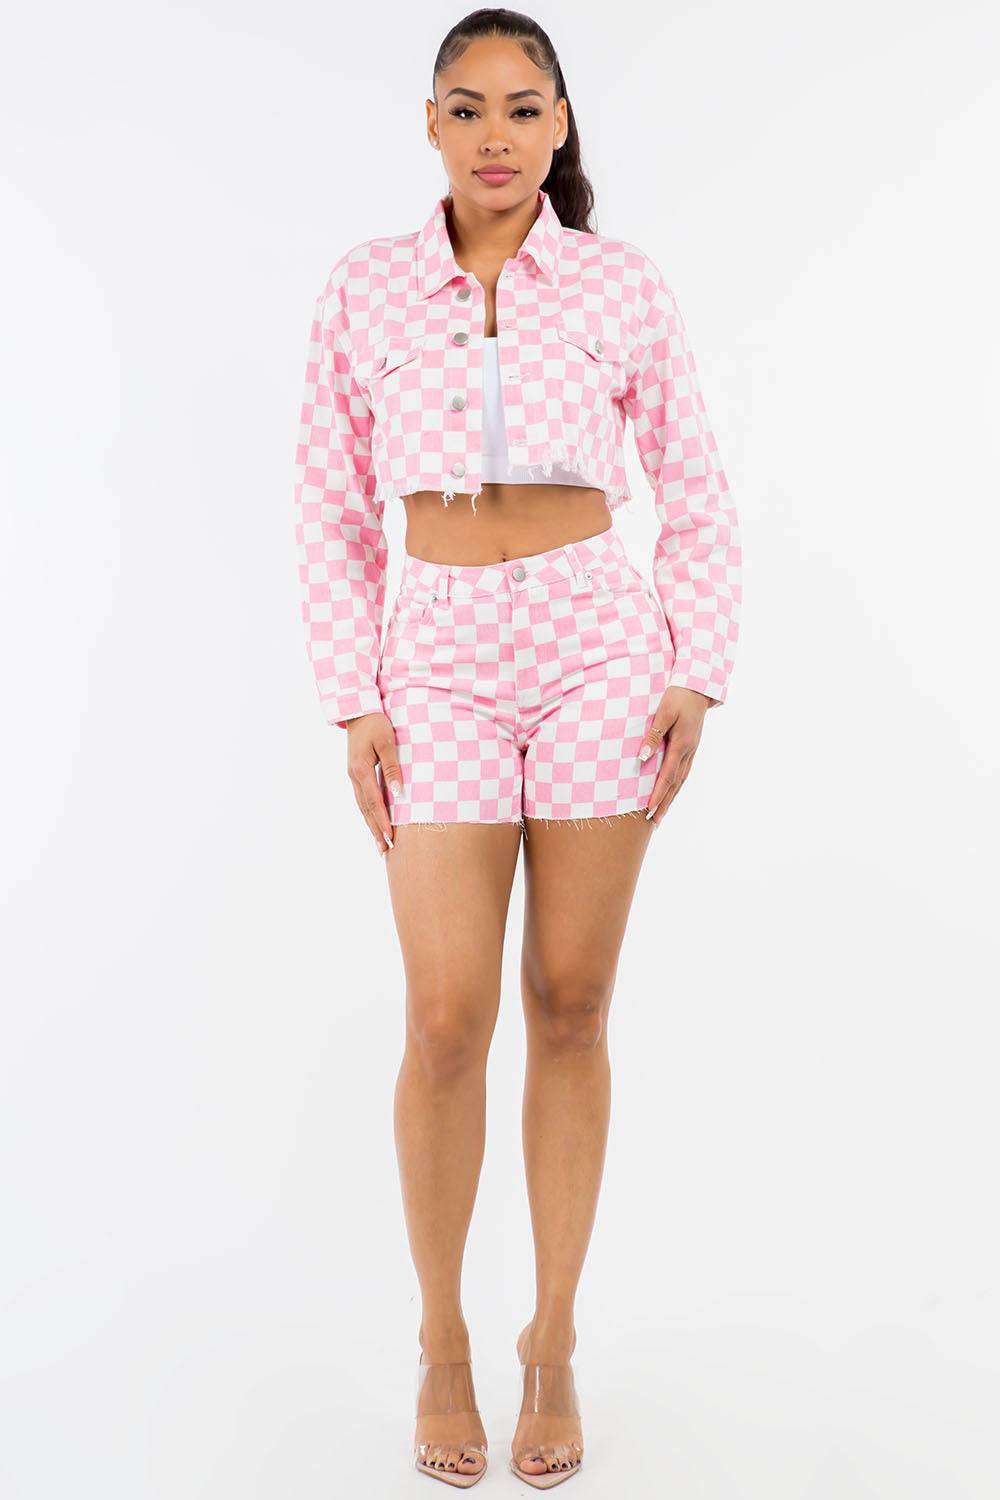 a woman in a pink and white checkered shirt and shorts